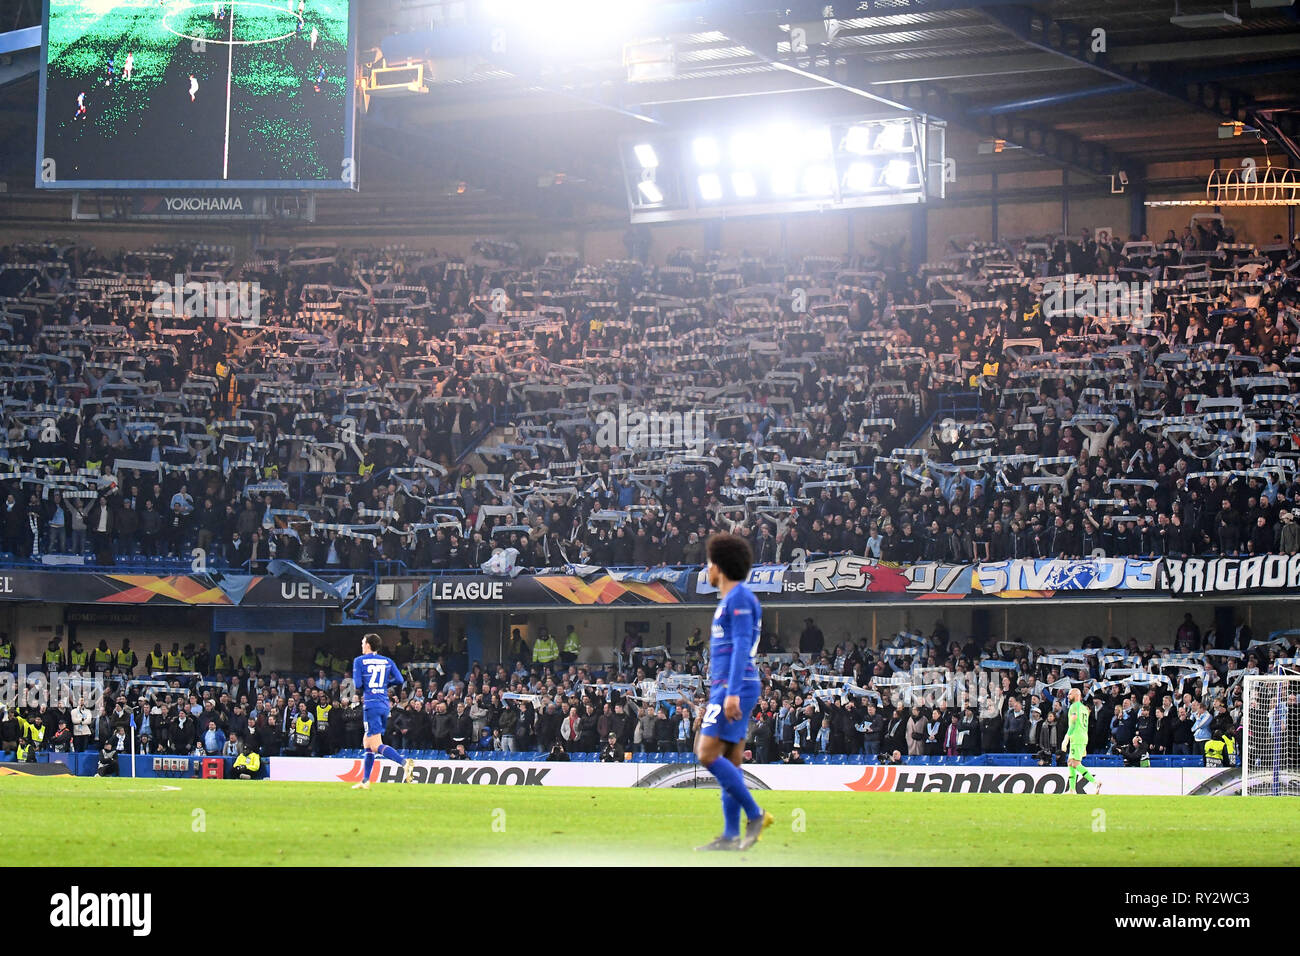 LONDON, ENGLAND - FEBRUARY 21, 2019: Malmo ultras pictured during the second leg of the 2018/19 UEFA Europa League Round of 32 game between Chelsea FC (England) and Malmo FF (Sweden) at Stamford Bridge. Stock Photo